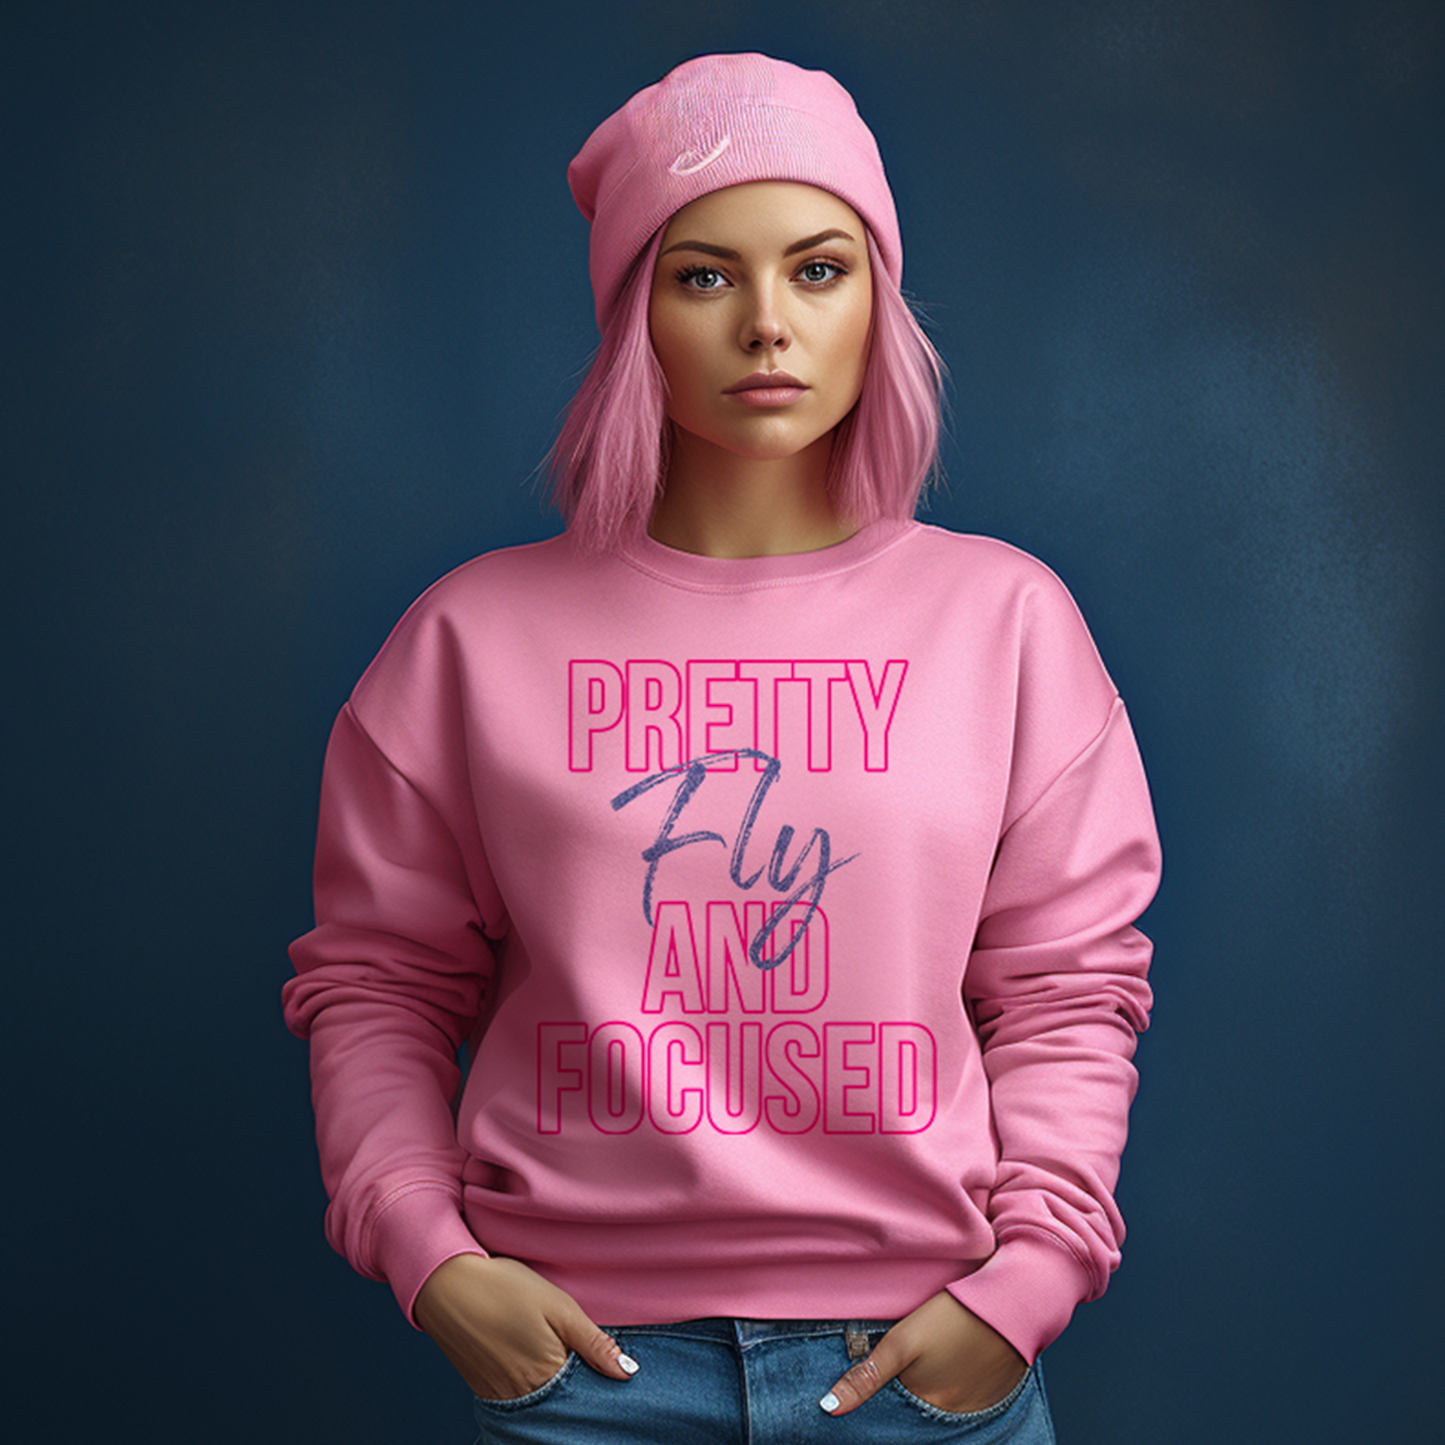 Pretty Fly and Focused Crewneck